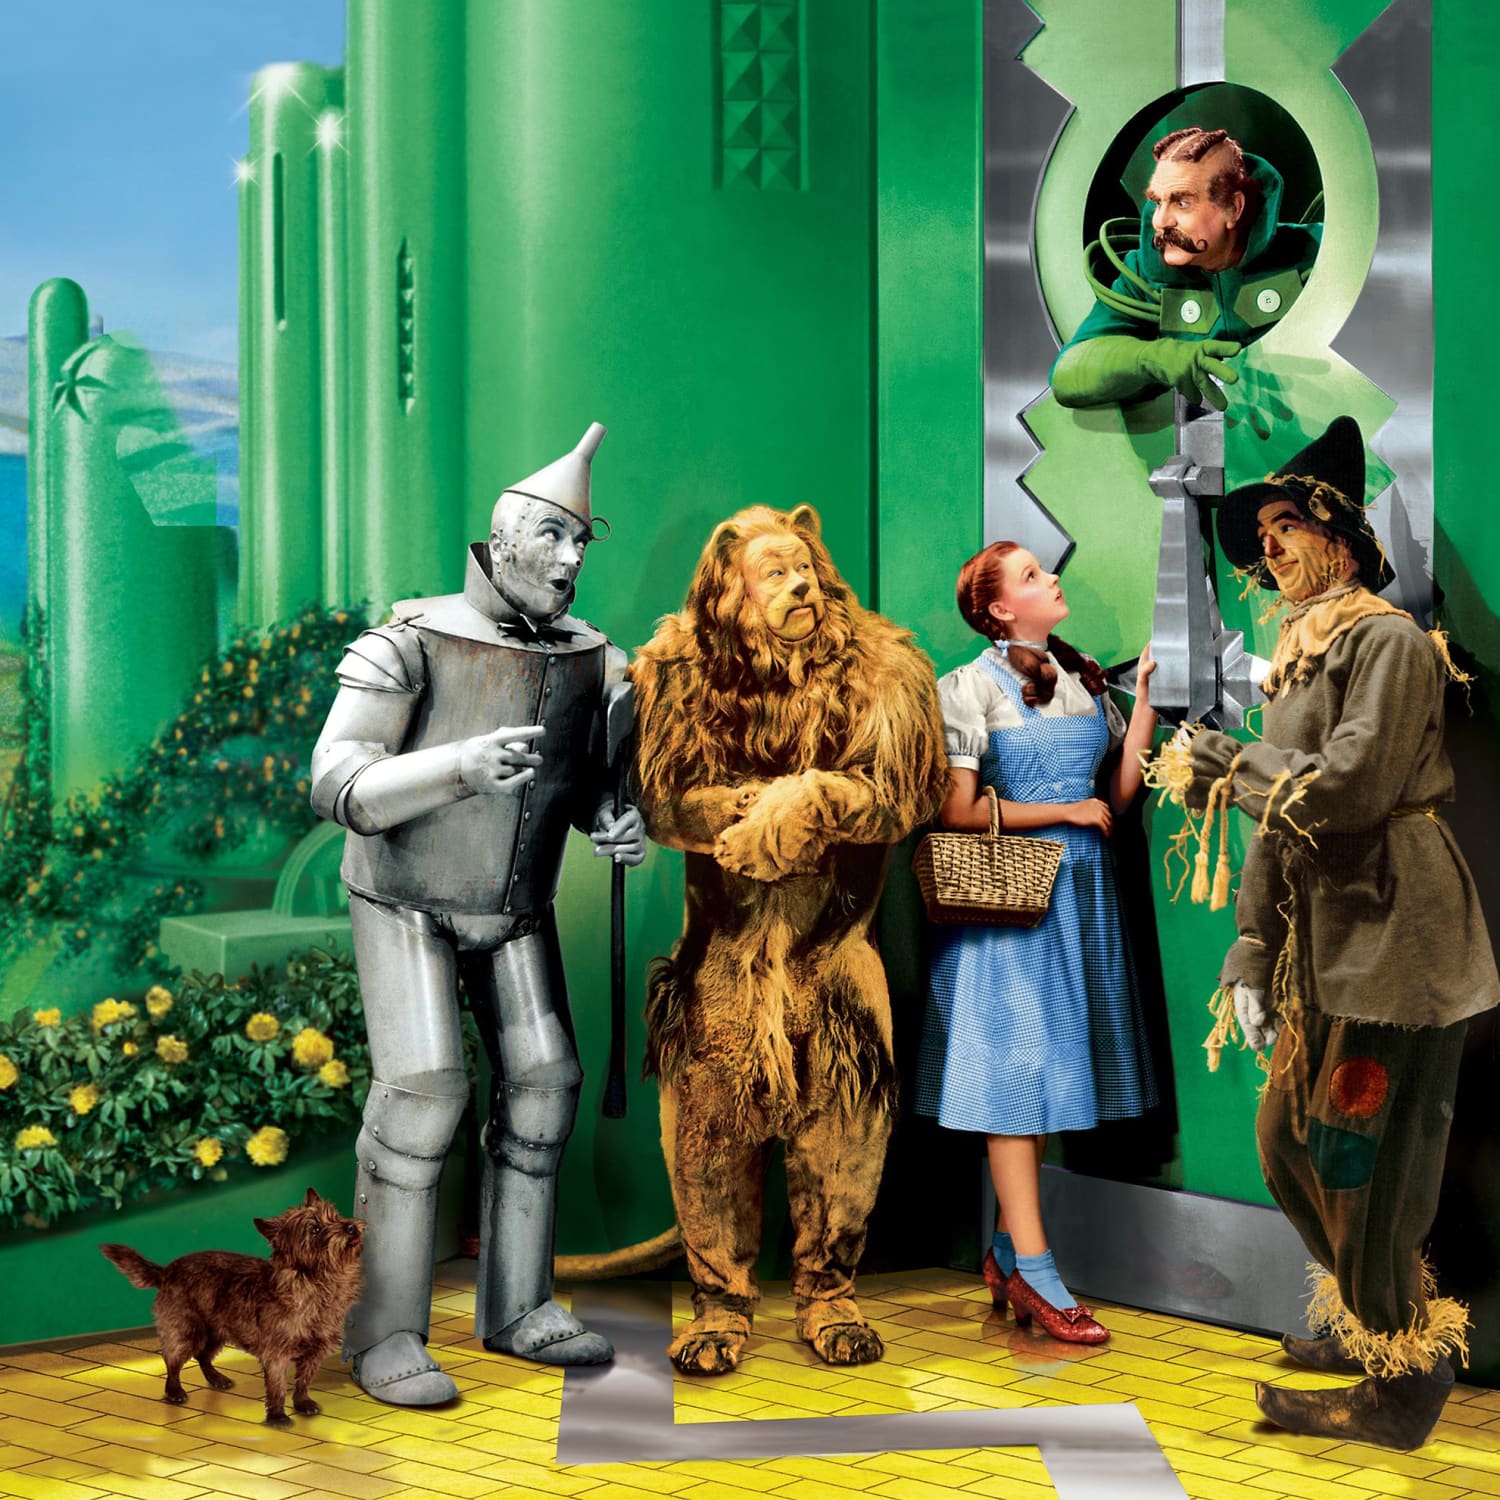  The Wizard of Oz